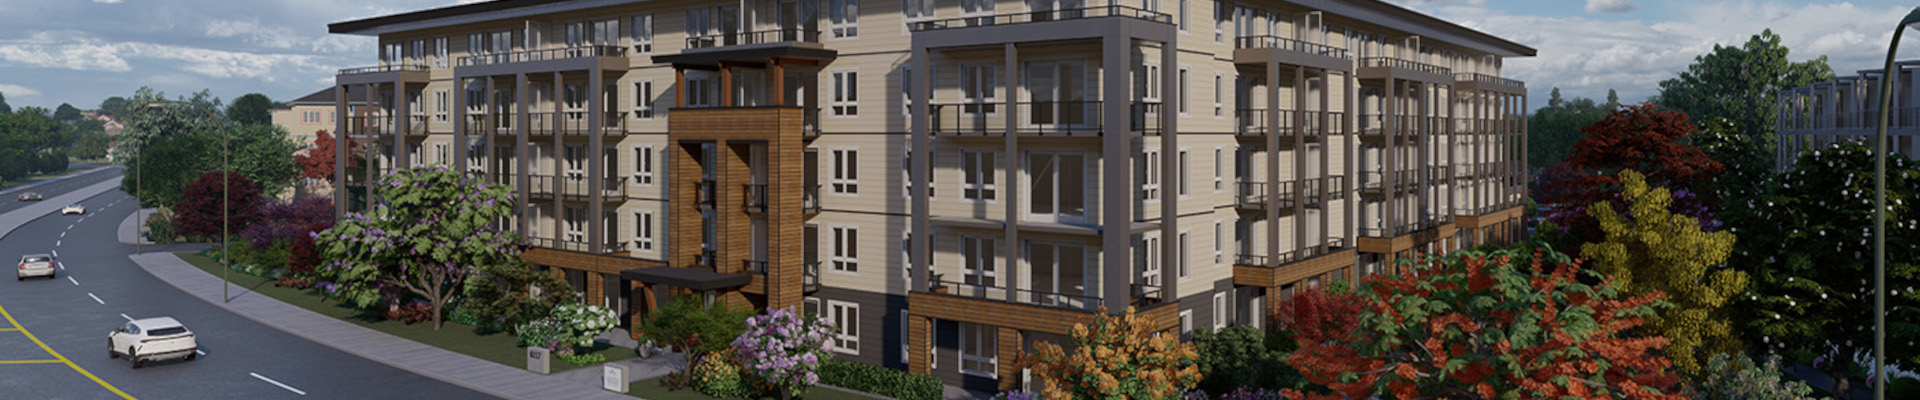 Skyline Apartment REIT buys 2nd property in Nanaimo, BC